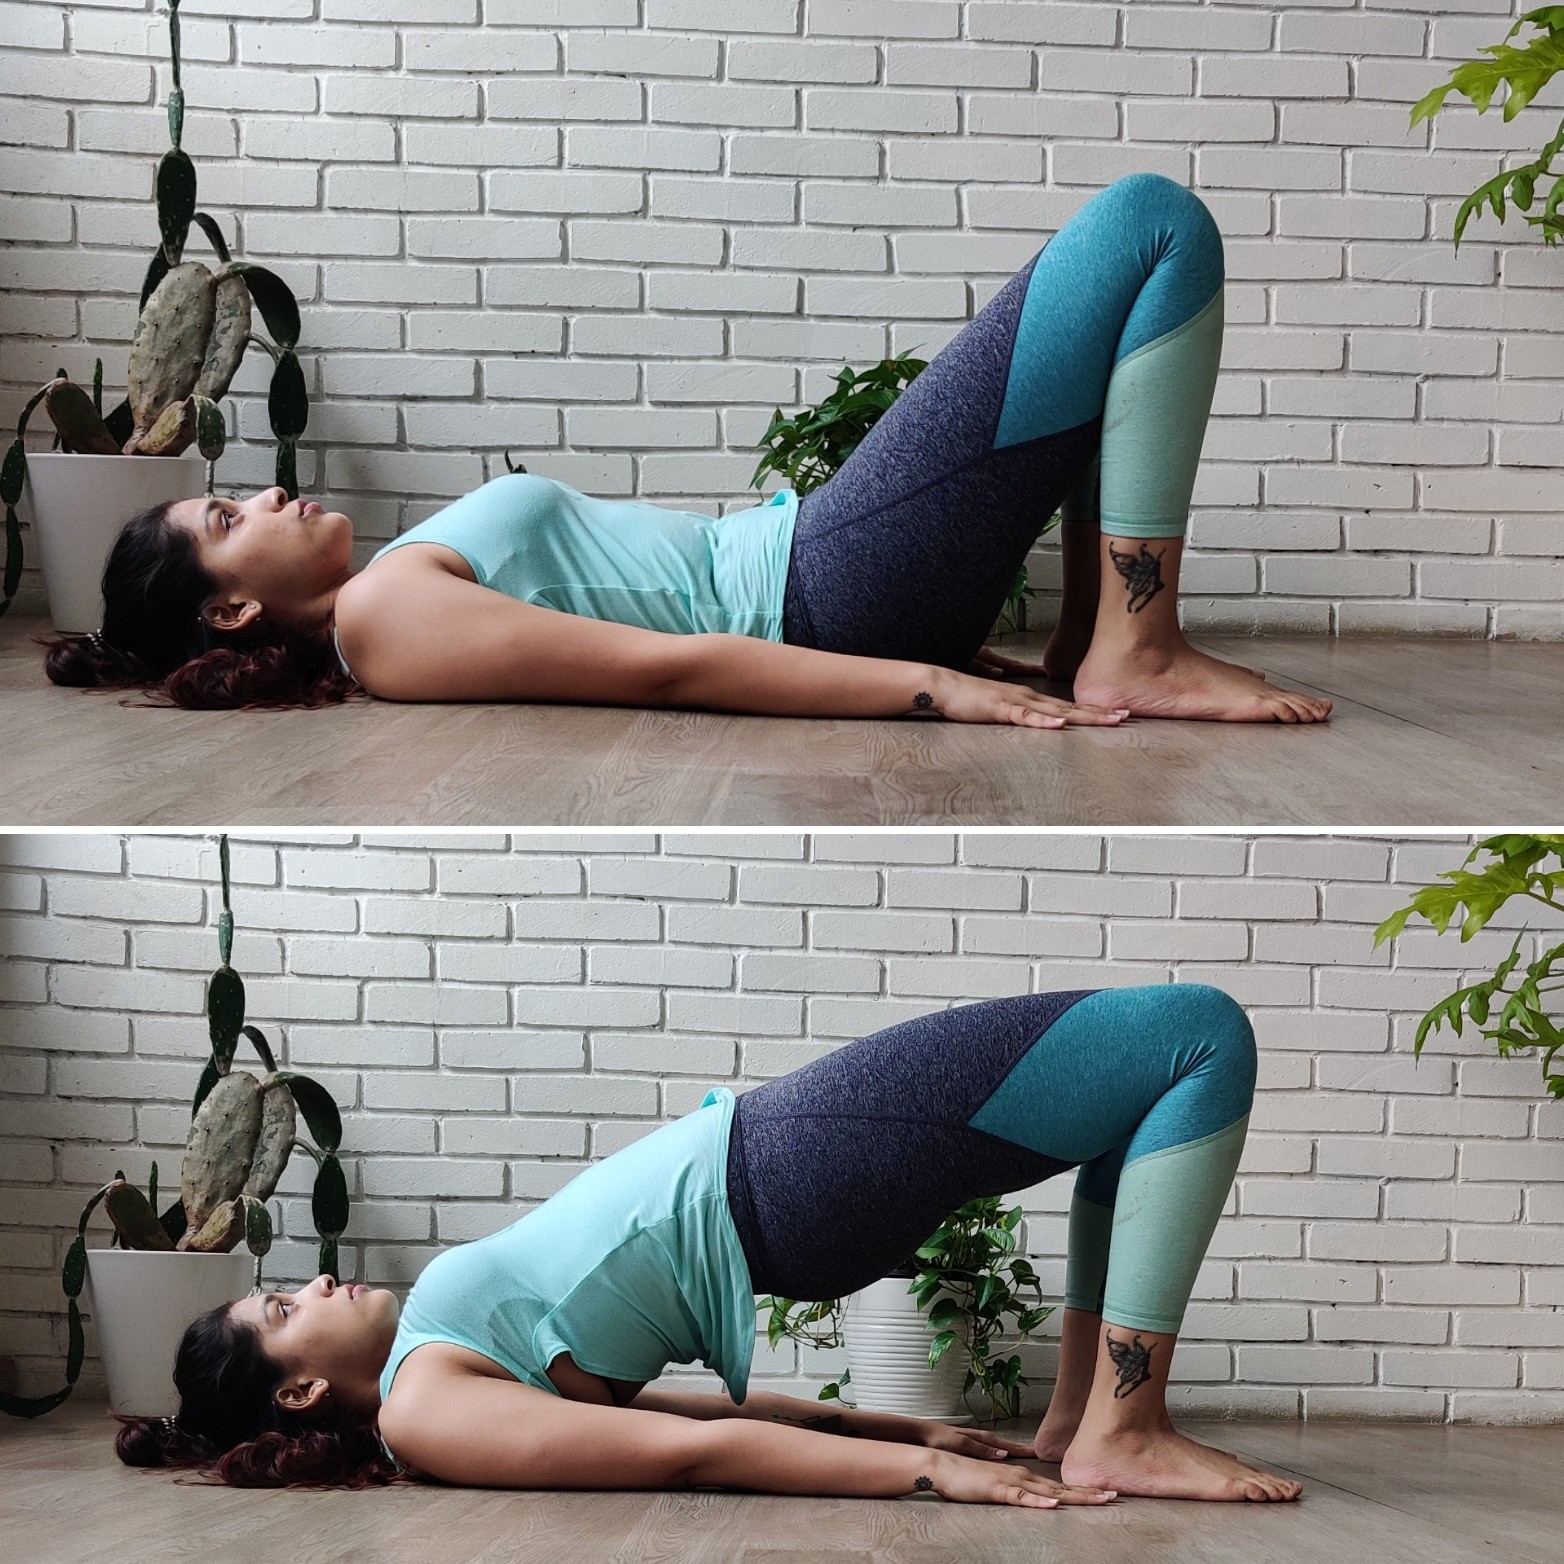 Yoga asanas for back ache 5 yoga poses to get relief from back pain   Indiacom